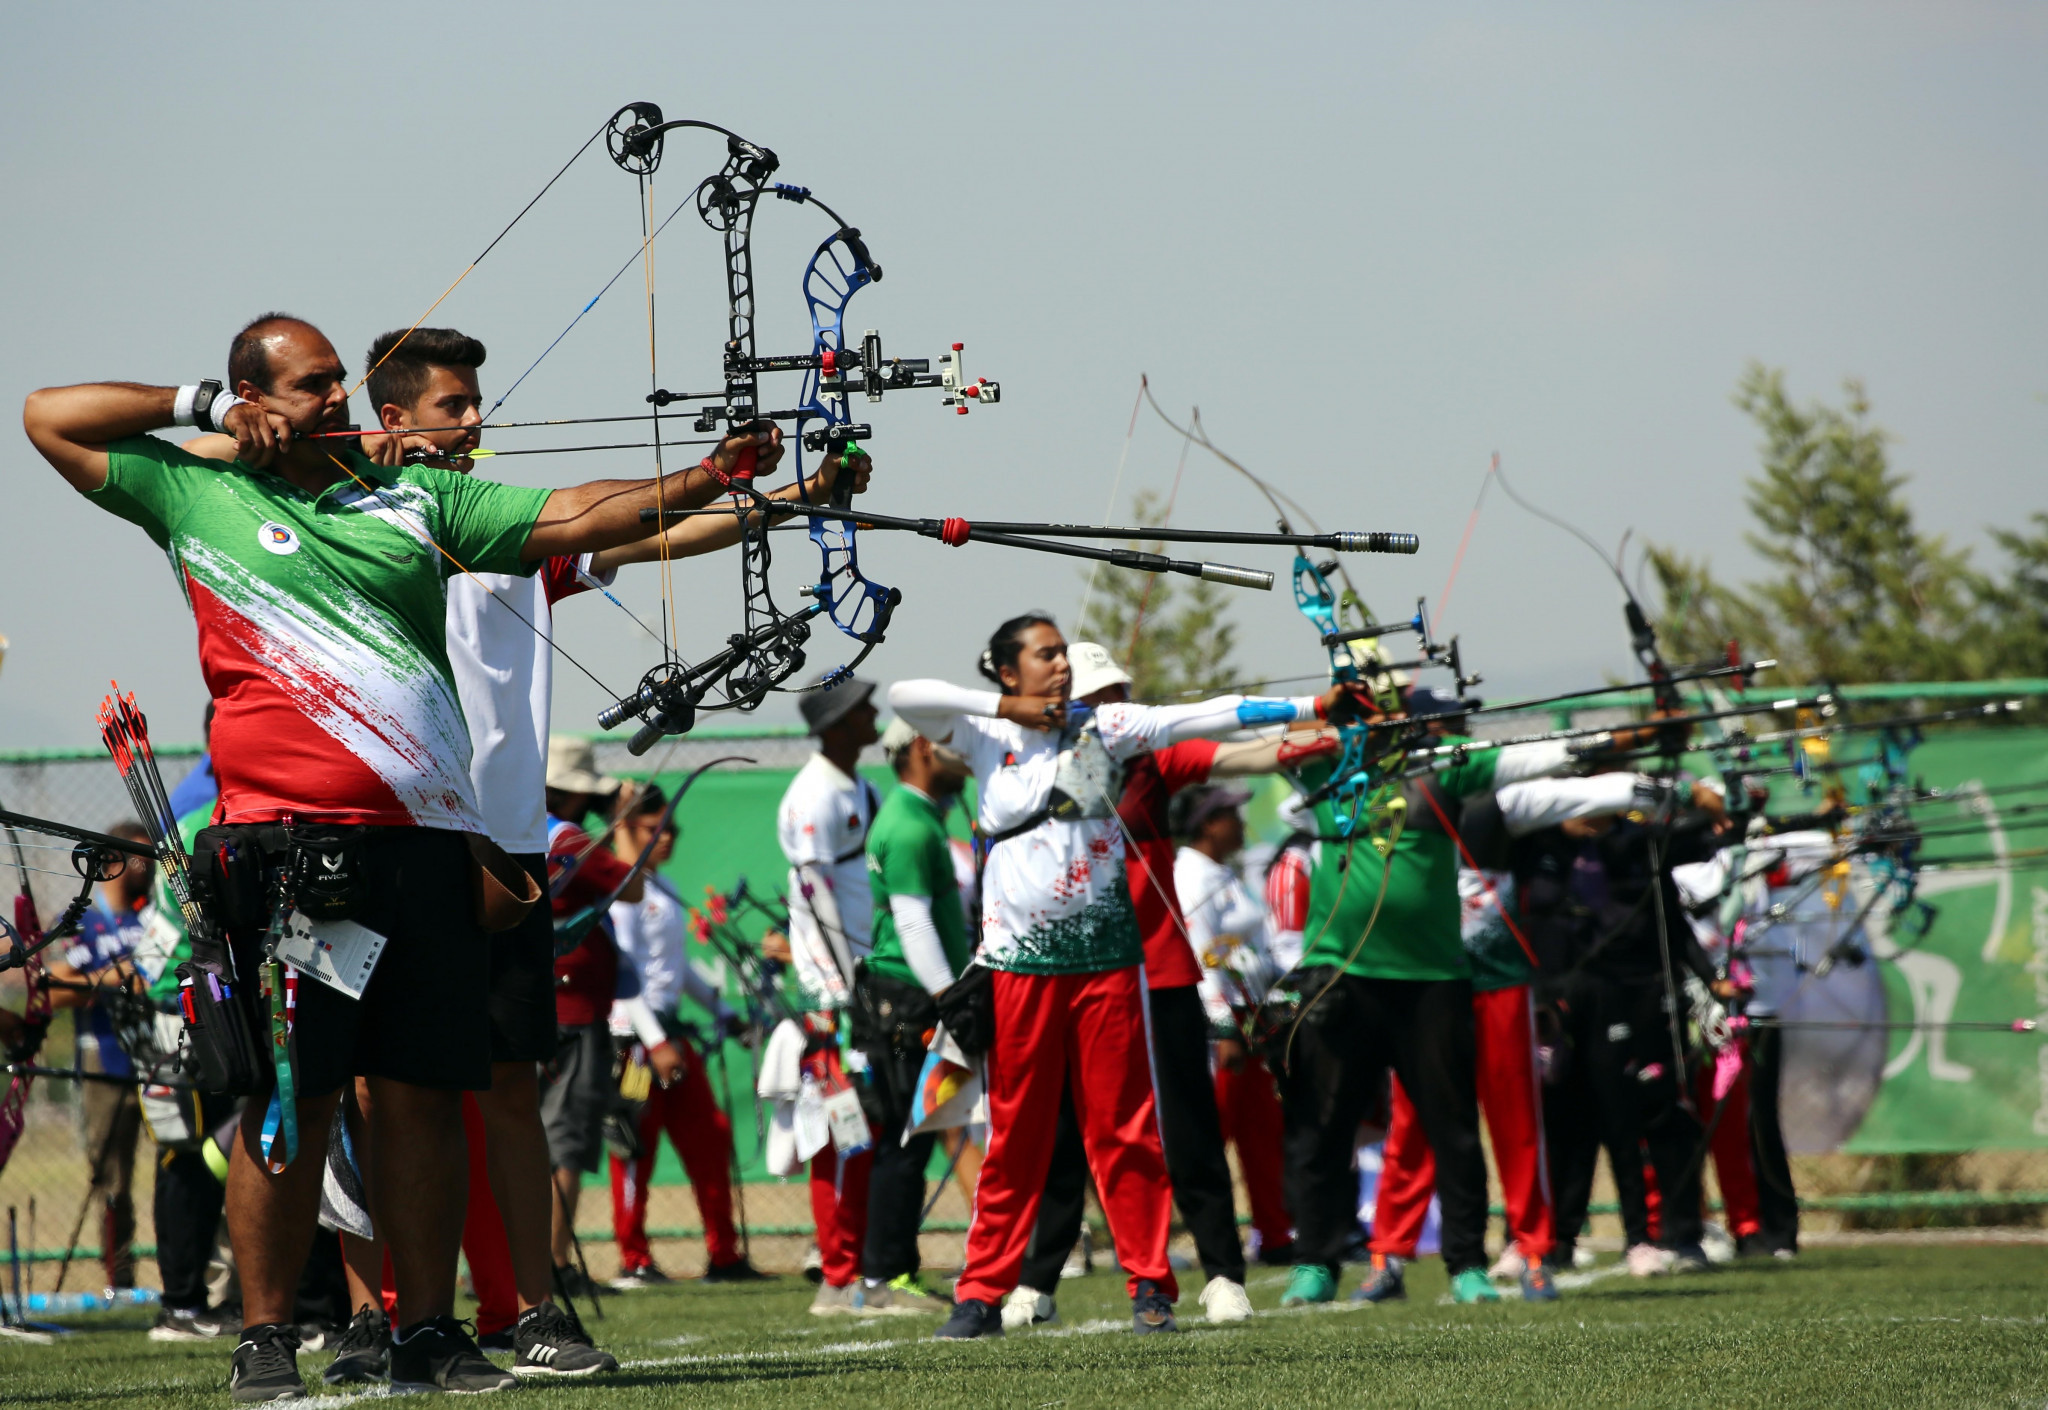 Archery finals were fiercely contested at the Saracoglu Sports Facility ©Konya 2021